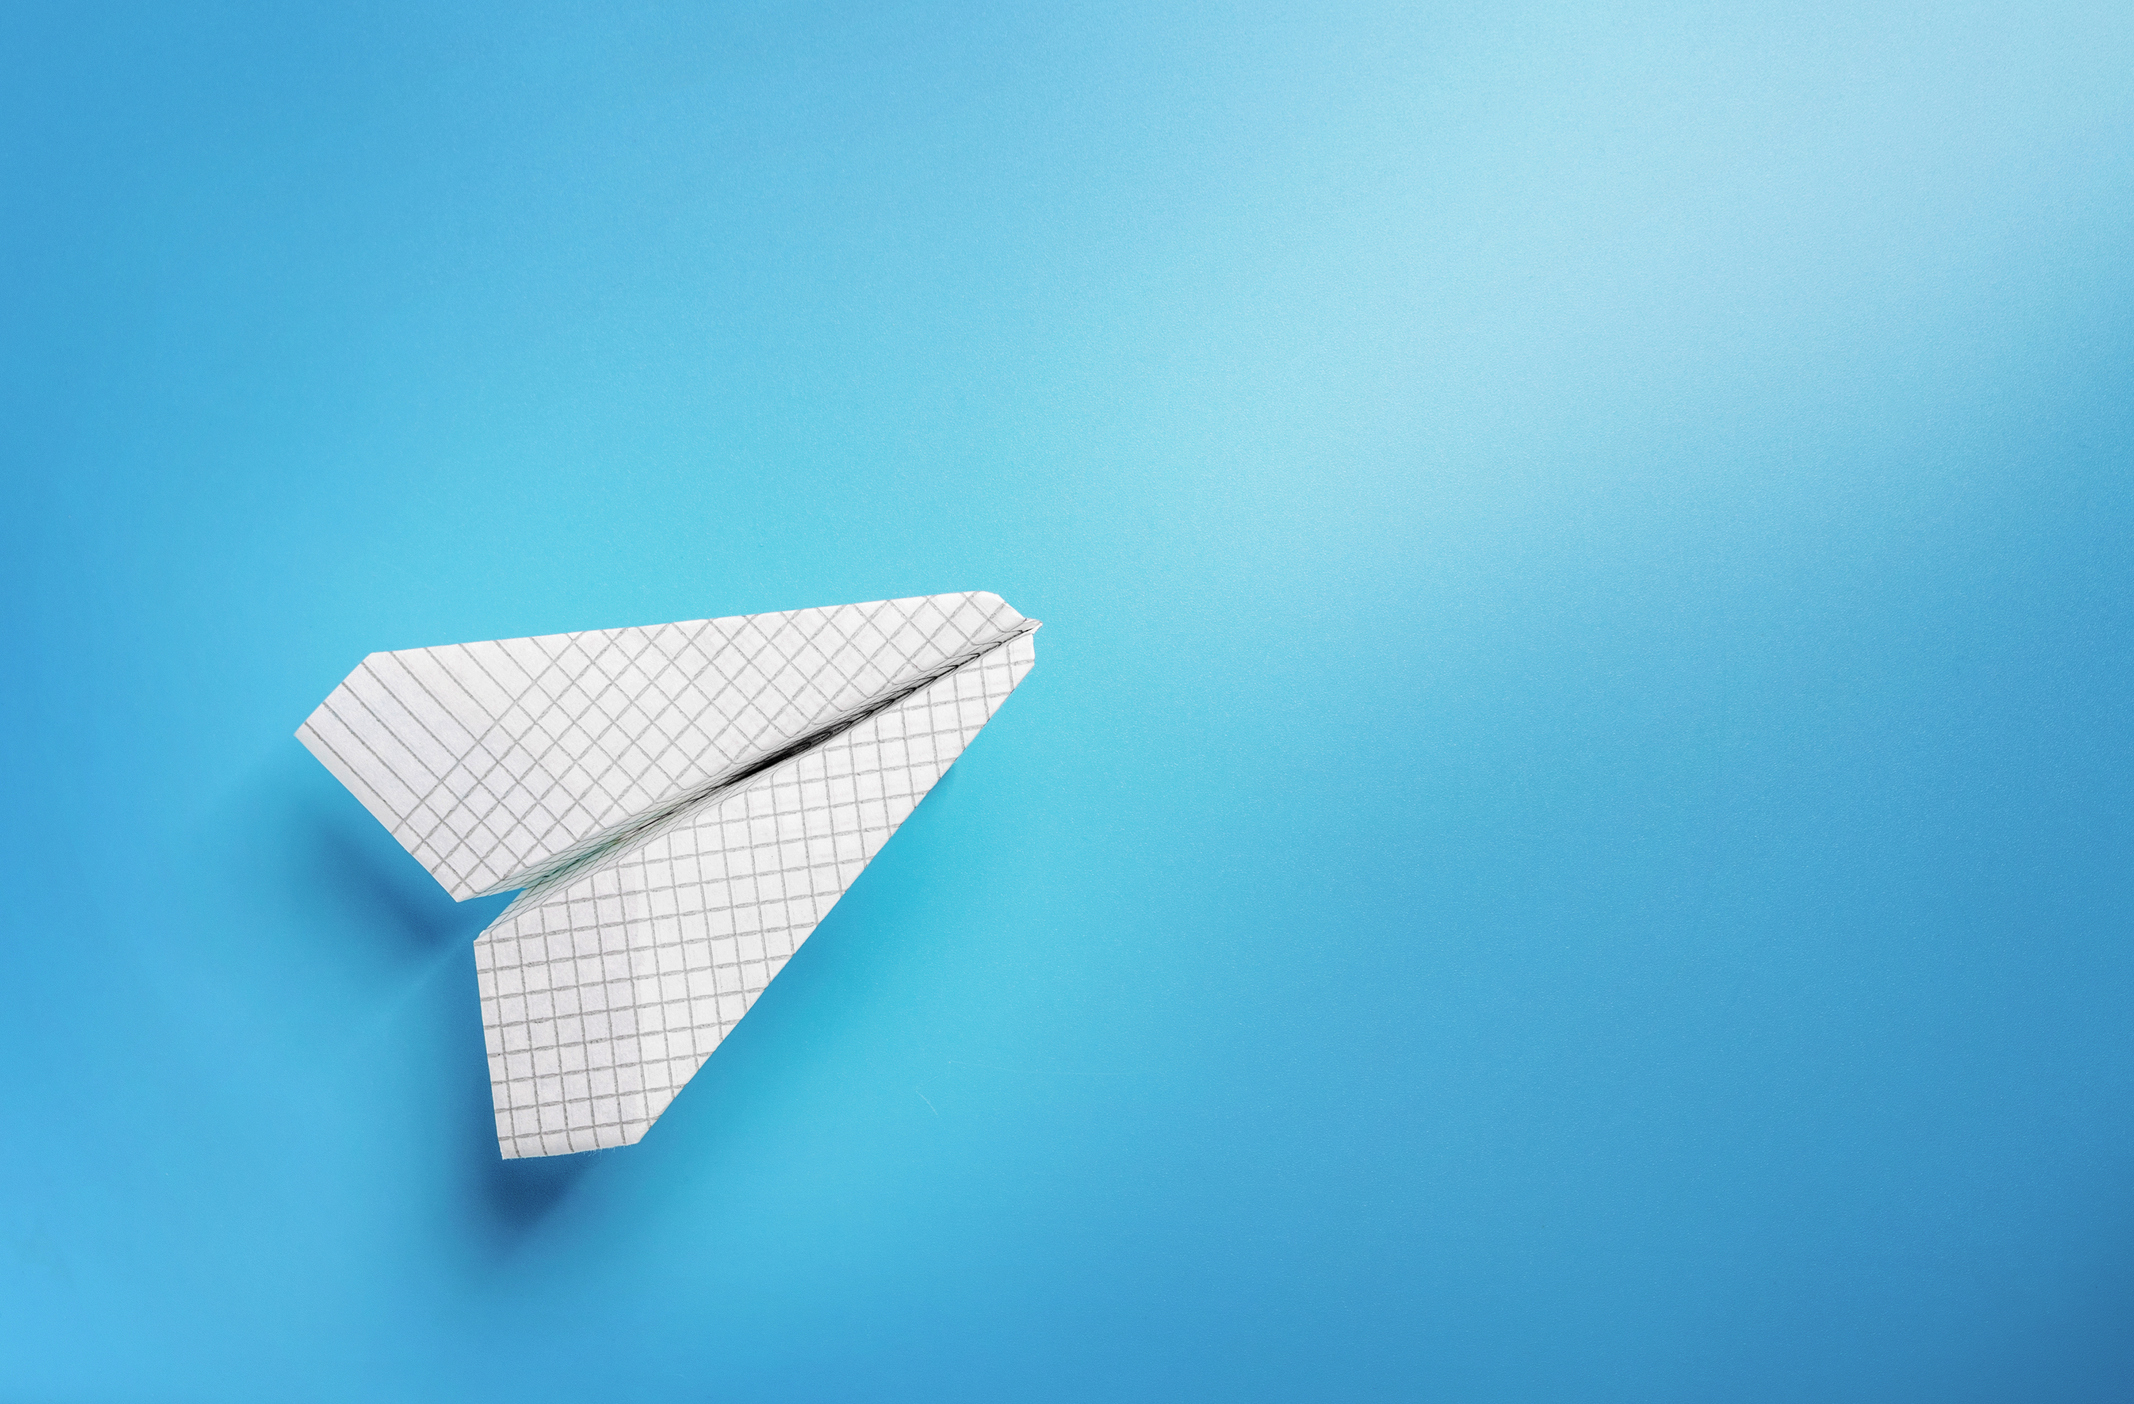 Paper plane on a blue background.